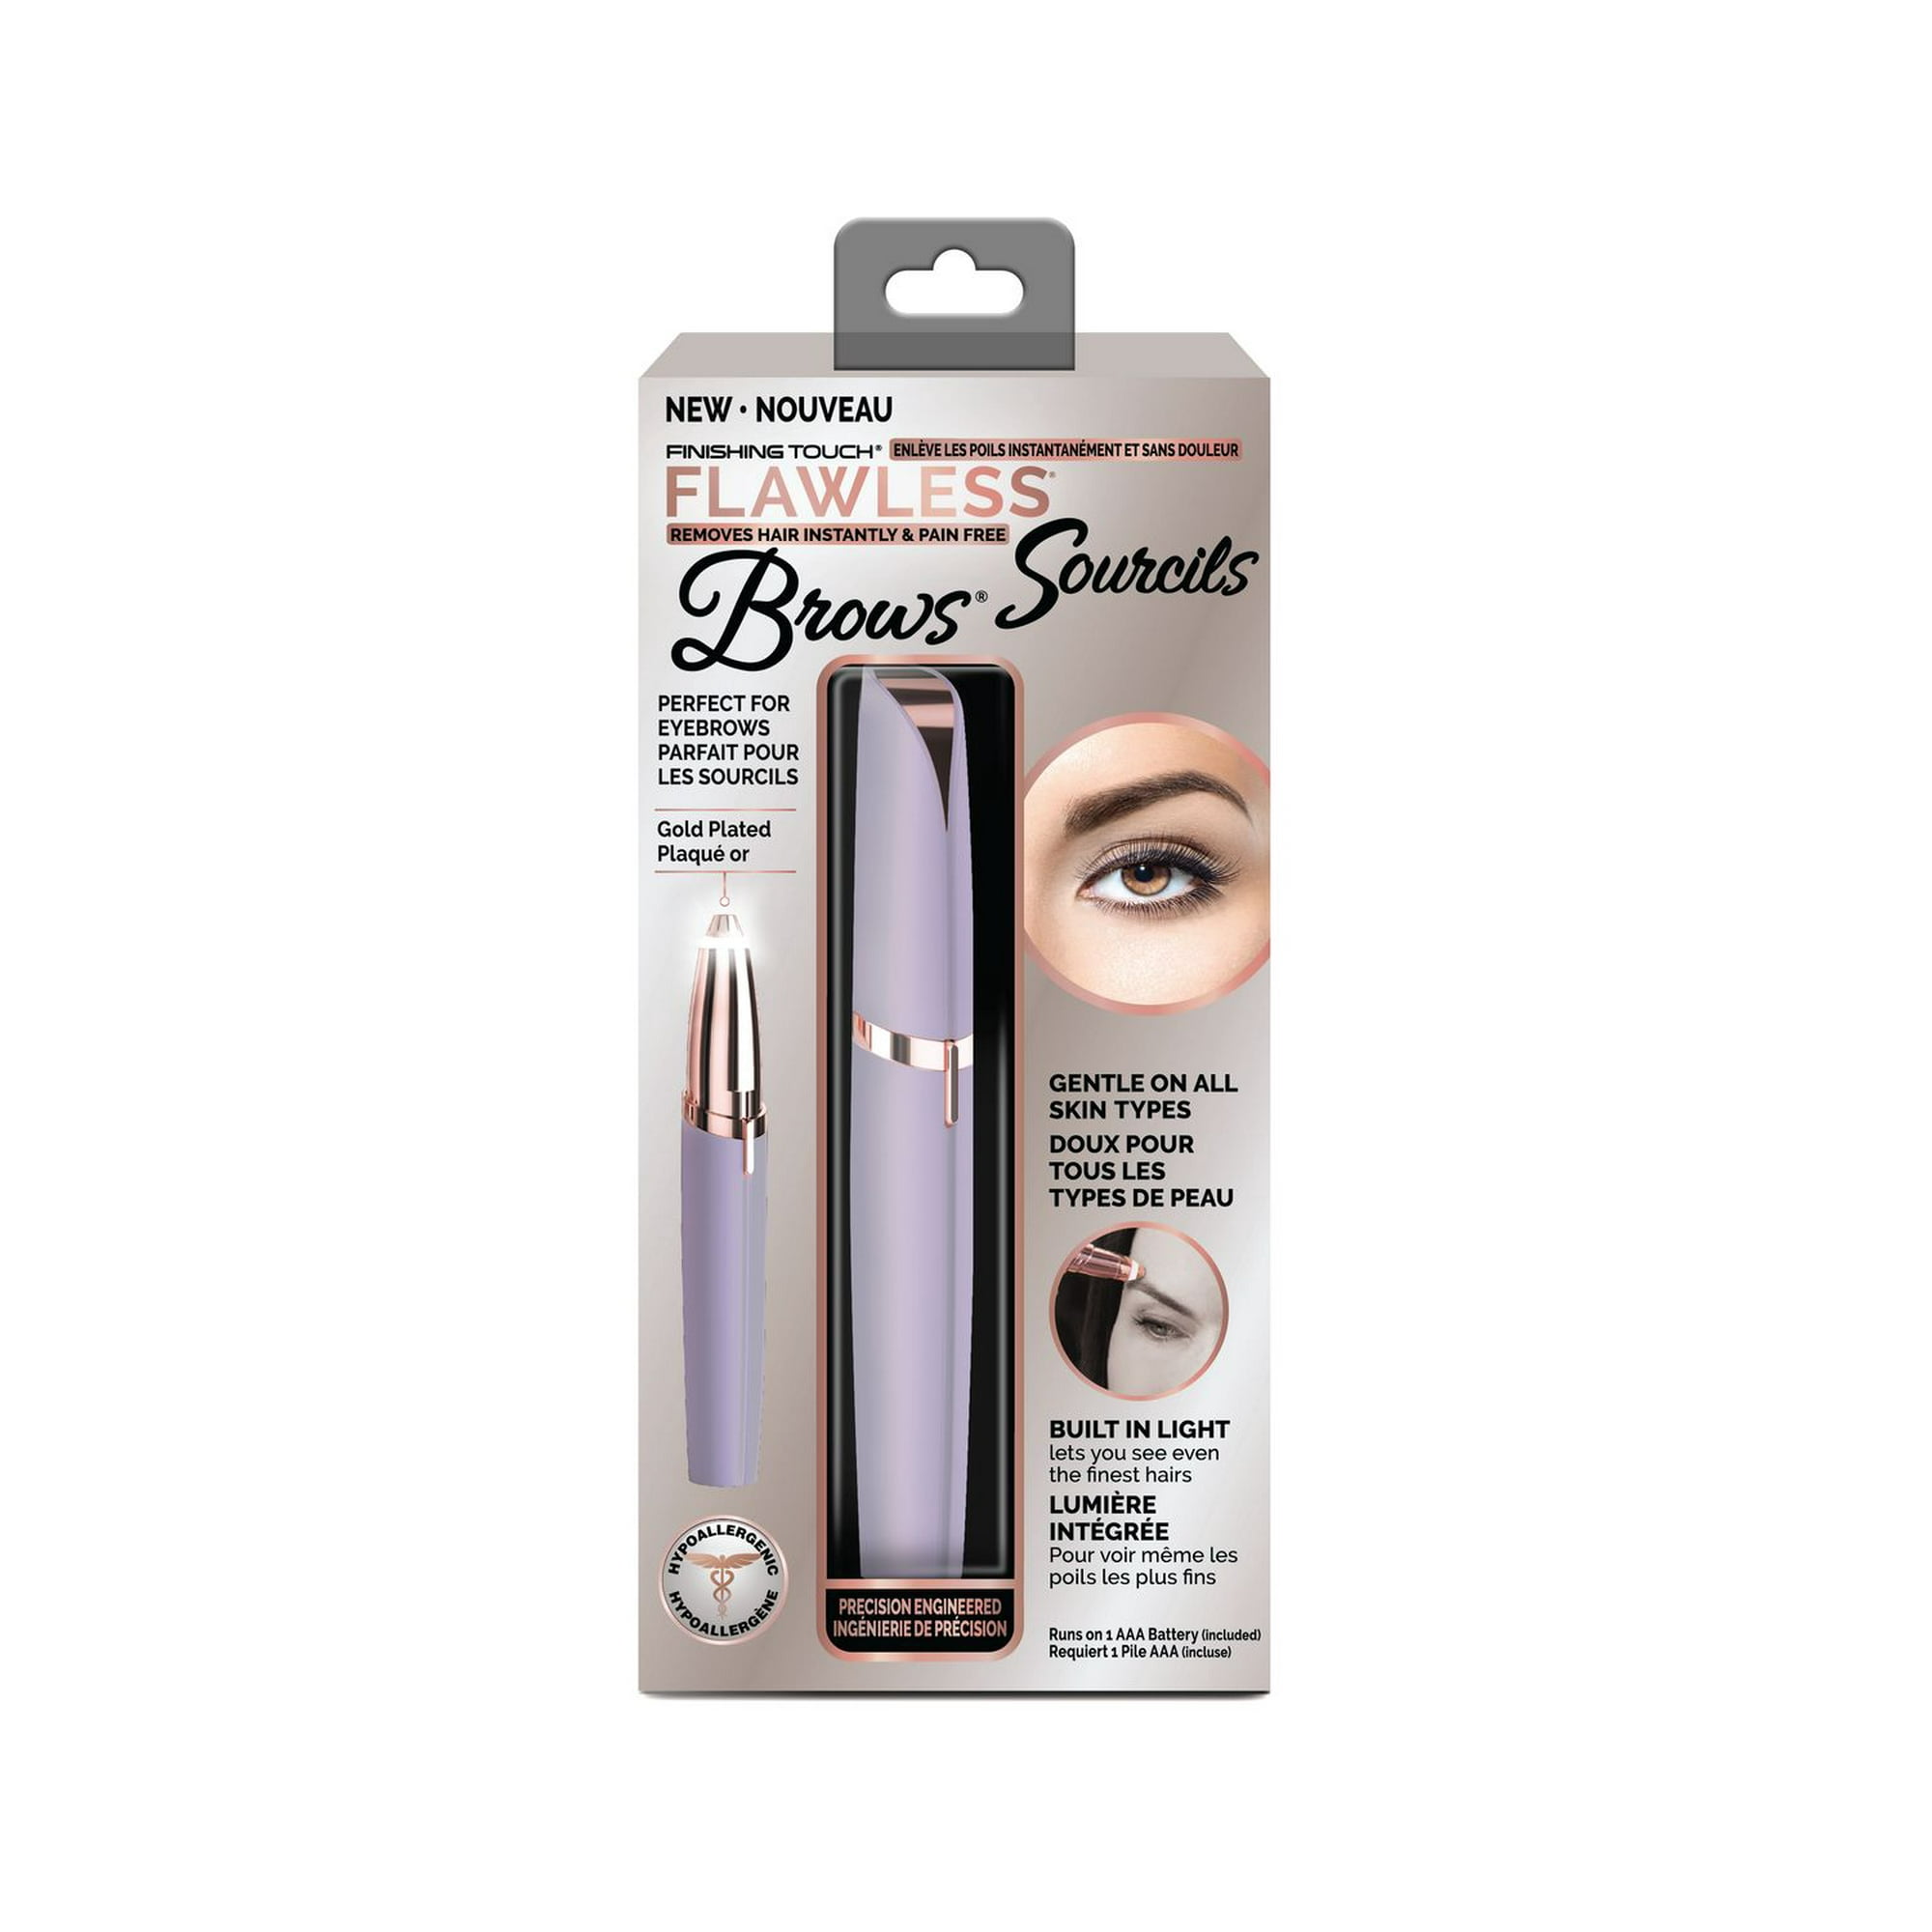 Finishing Touch Flawless Hair Remover for Eyebrows, Lavender, 1